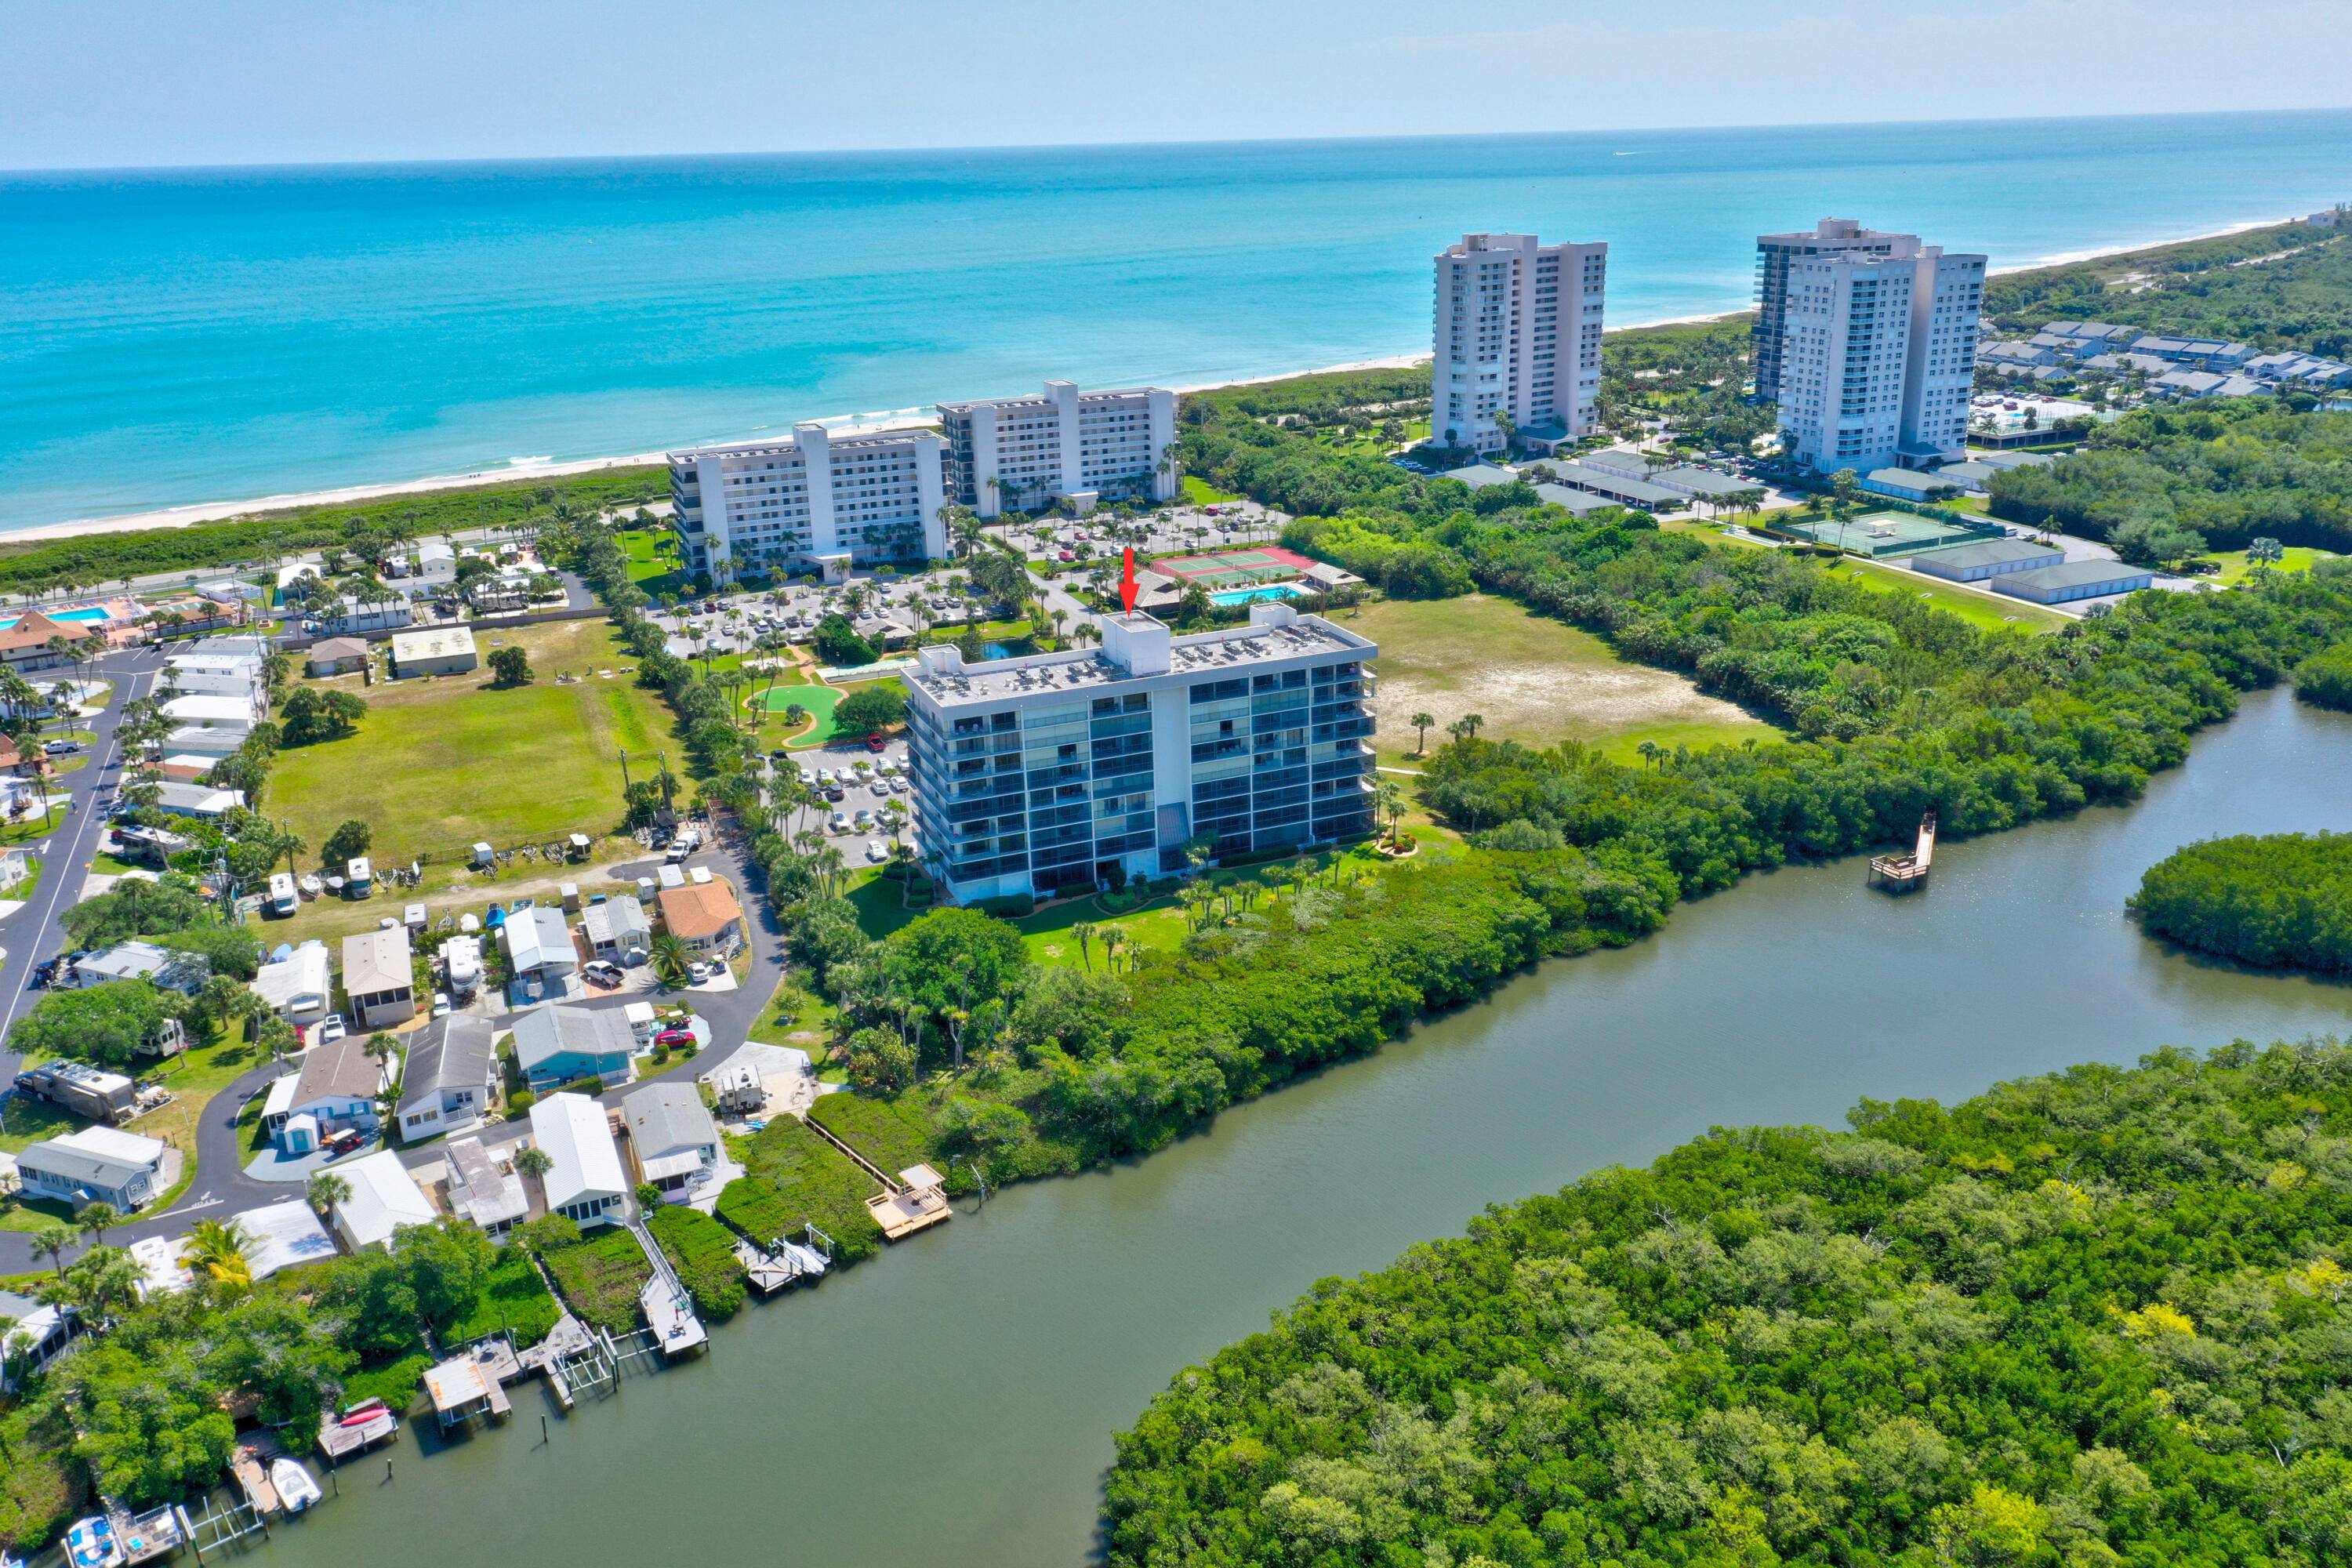 Discover the true essence of the Treasure Coast by experiencing a stay at this stunning two bedroom, two bathroom island sanctuary.